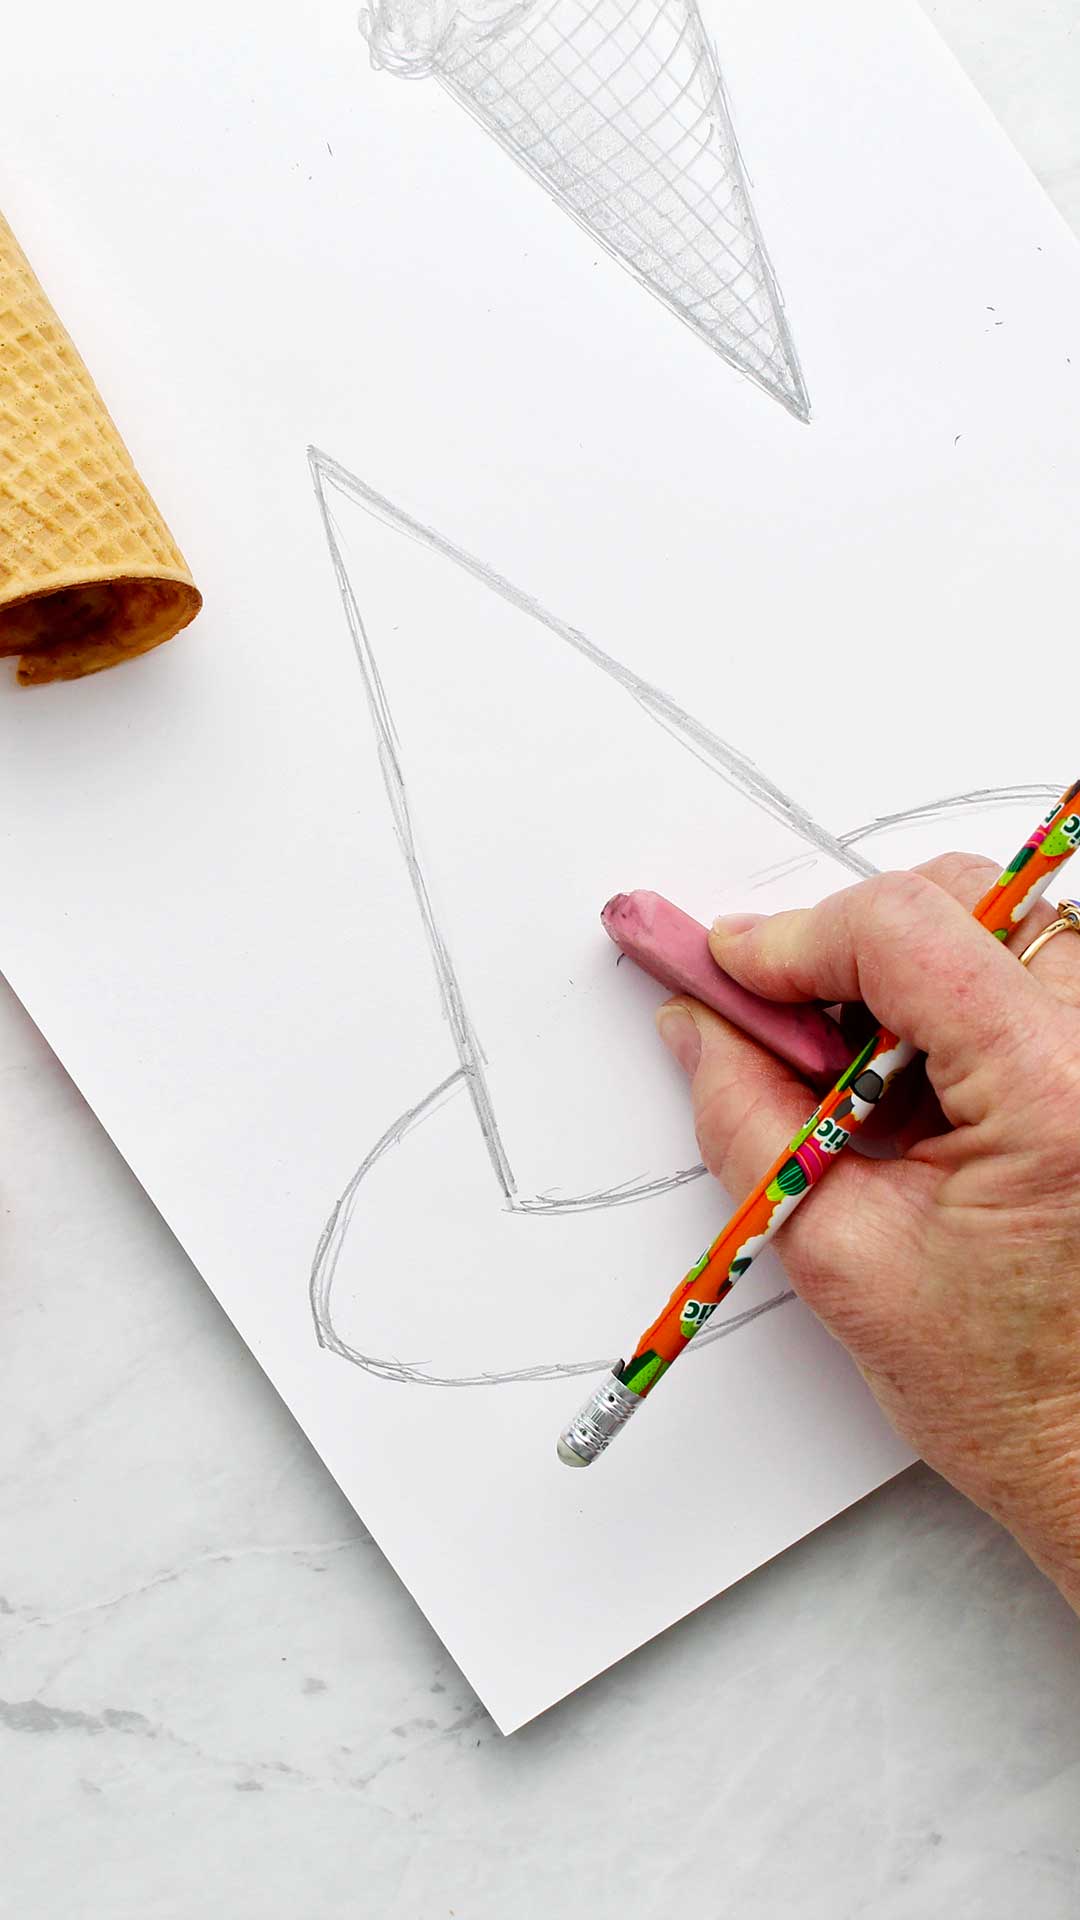 A hand erasing a line in a pencil drawing of a witches hat.